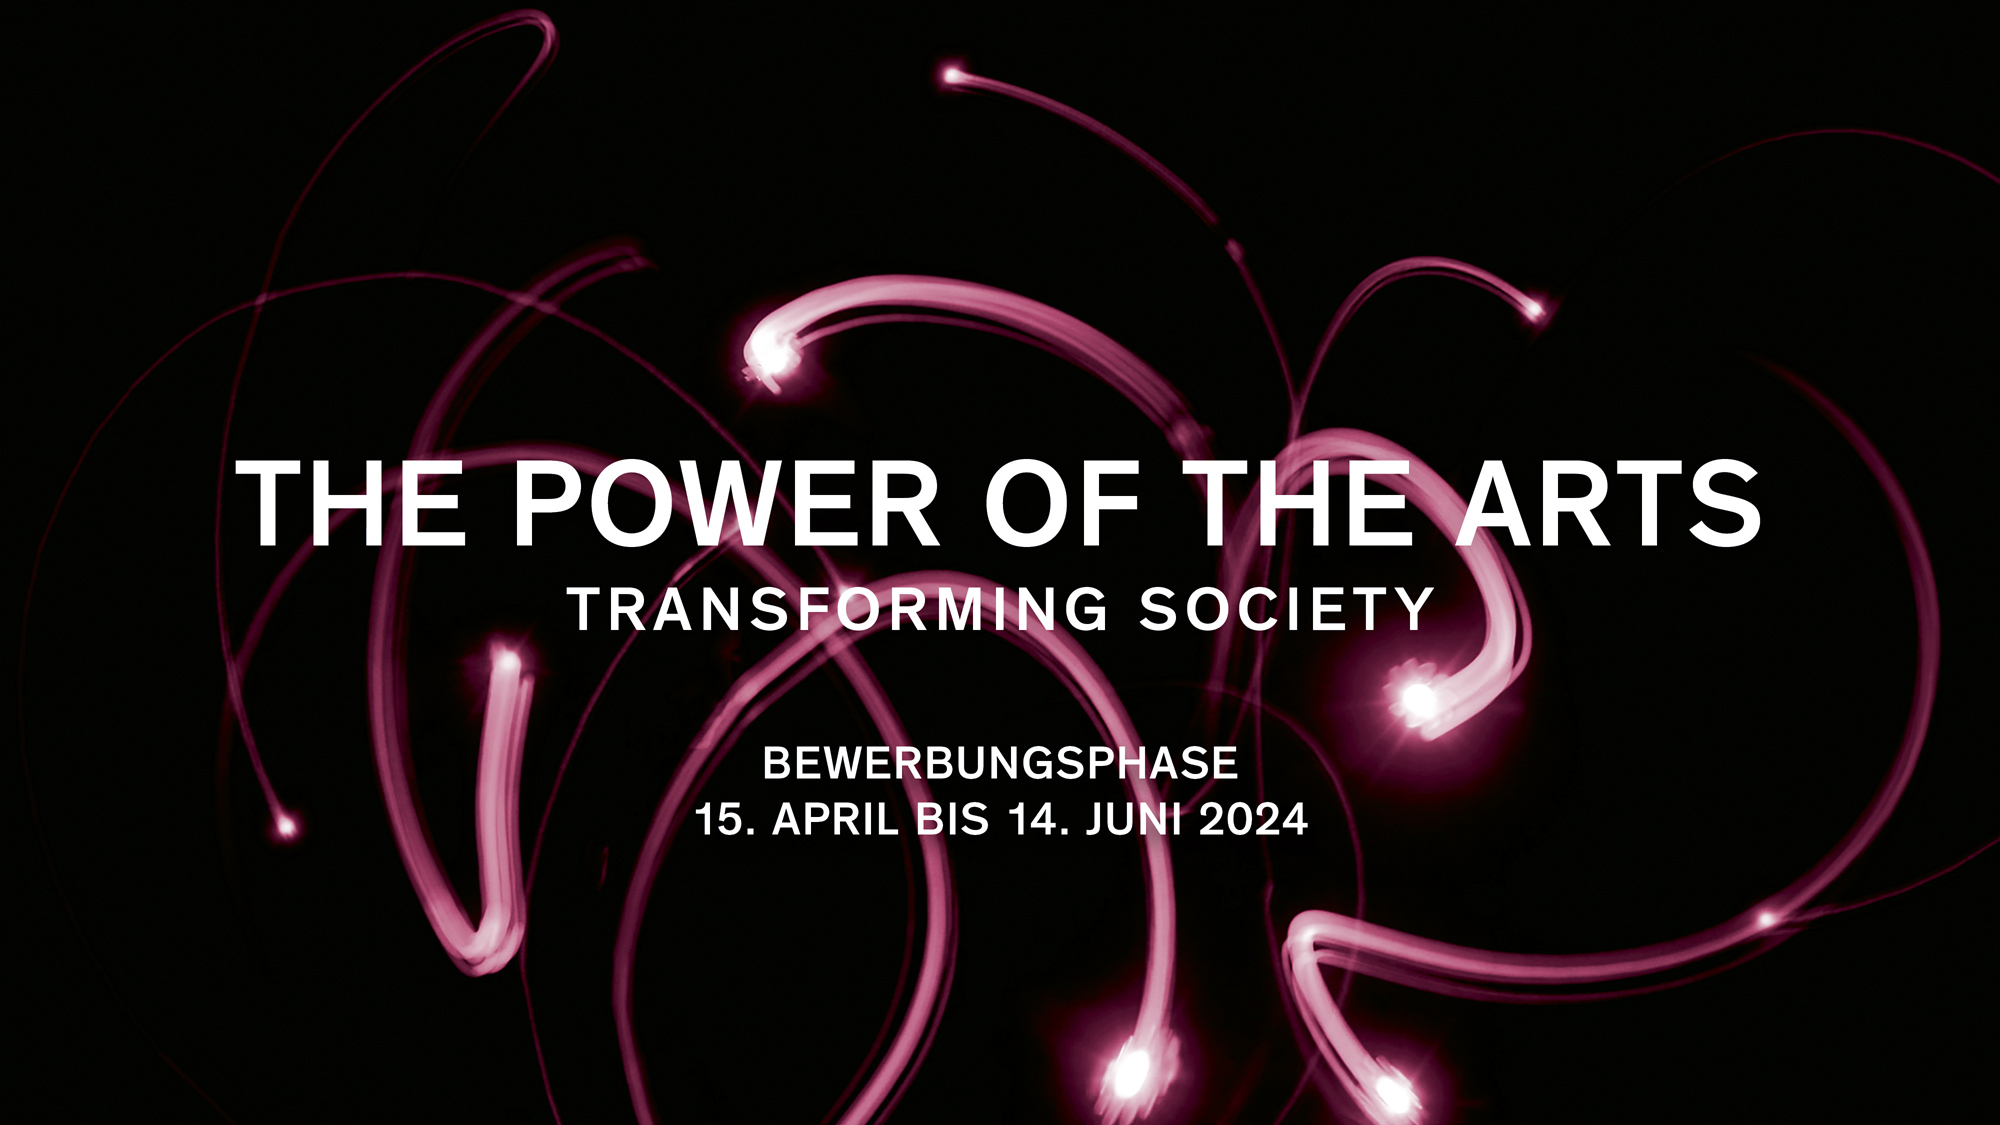 The Power of the Arts Bewerbungsphase 2024